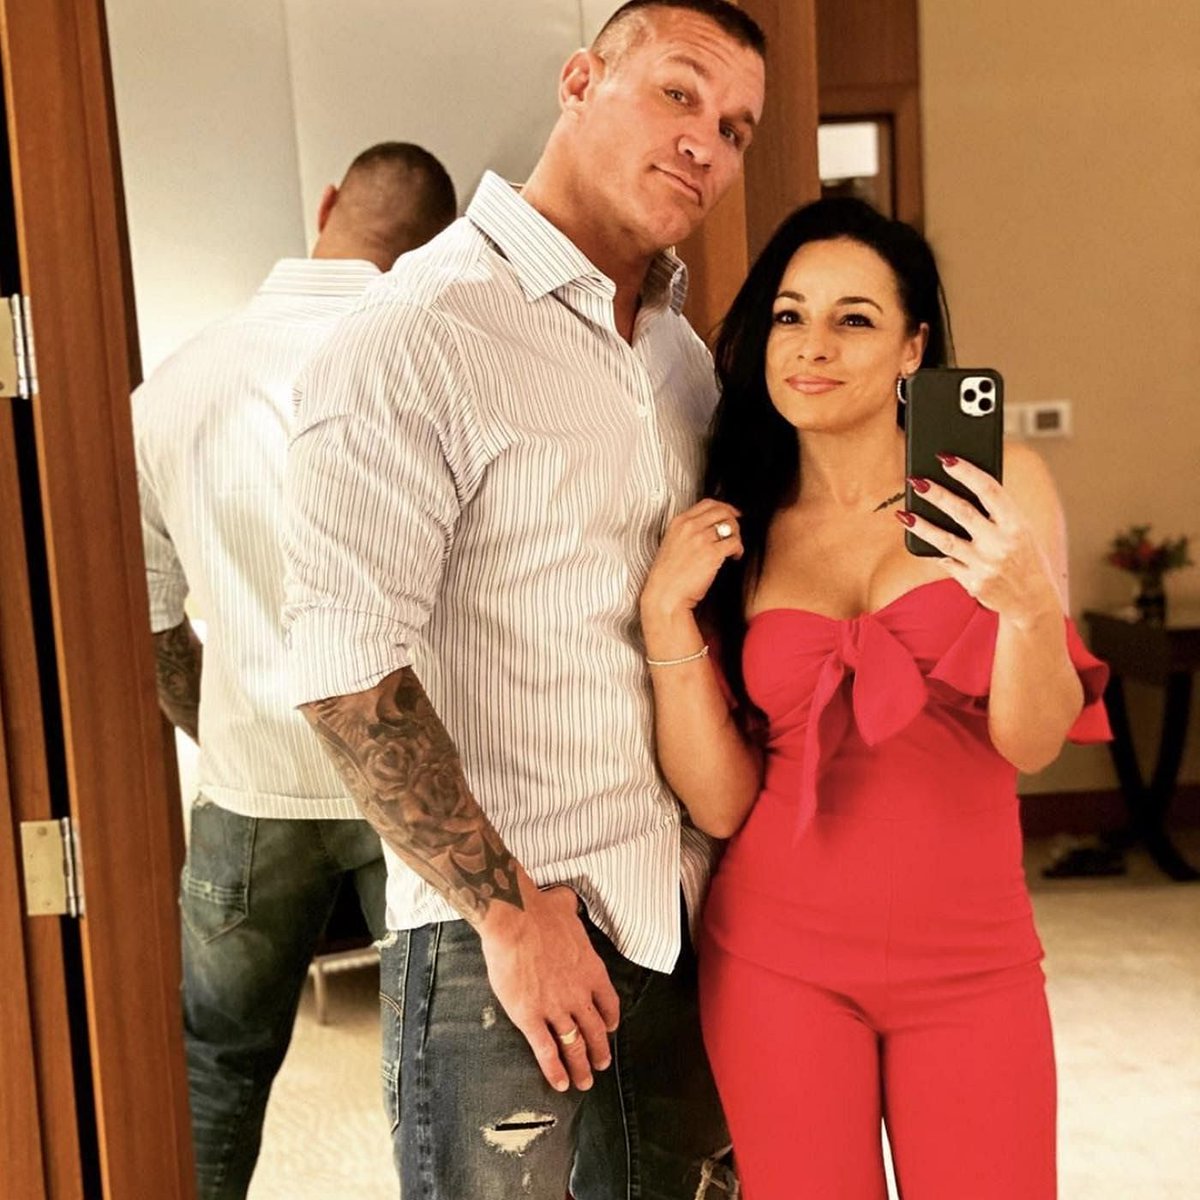 3. Randy Orton – Kimberly Kessler

Randy Orton and his wife Kimberly Marie started dating in 2014, and they got married in 2015. They are both blessed with 3 Children. #RoyalSports #Sportscenter